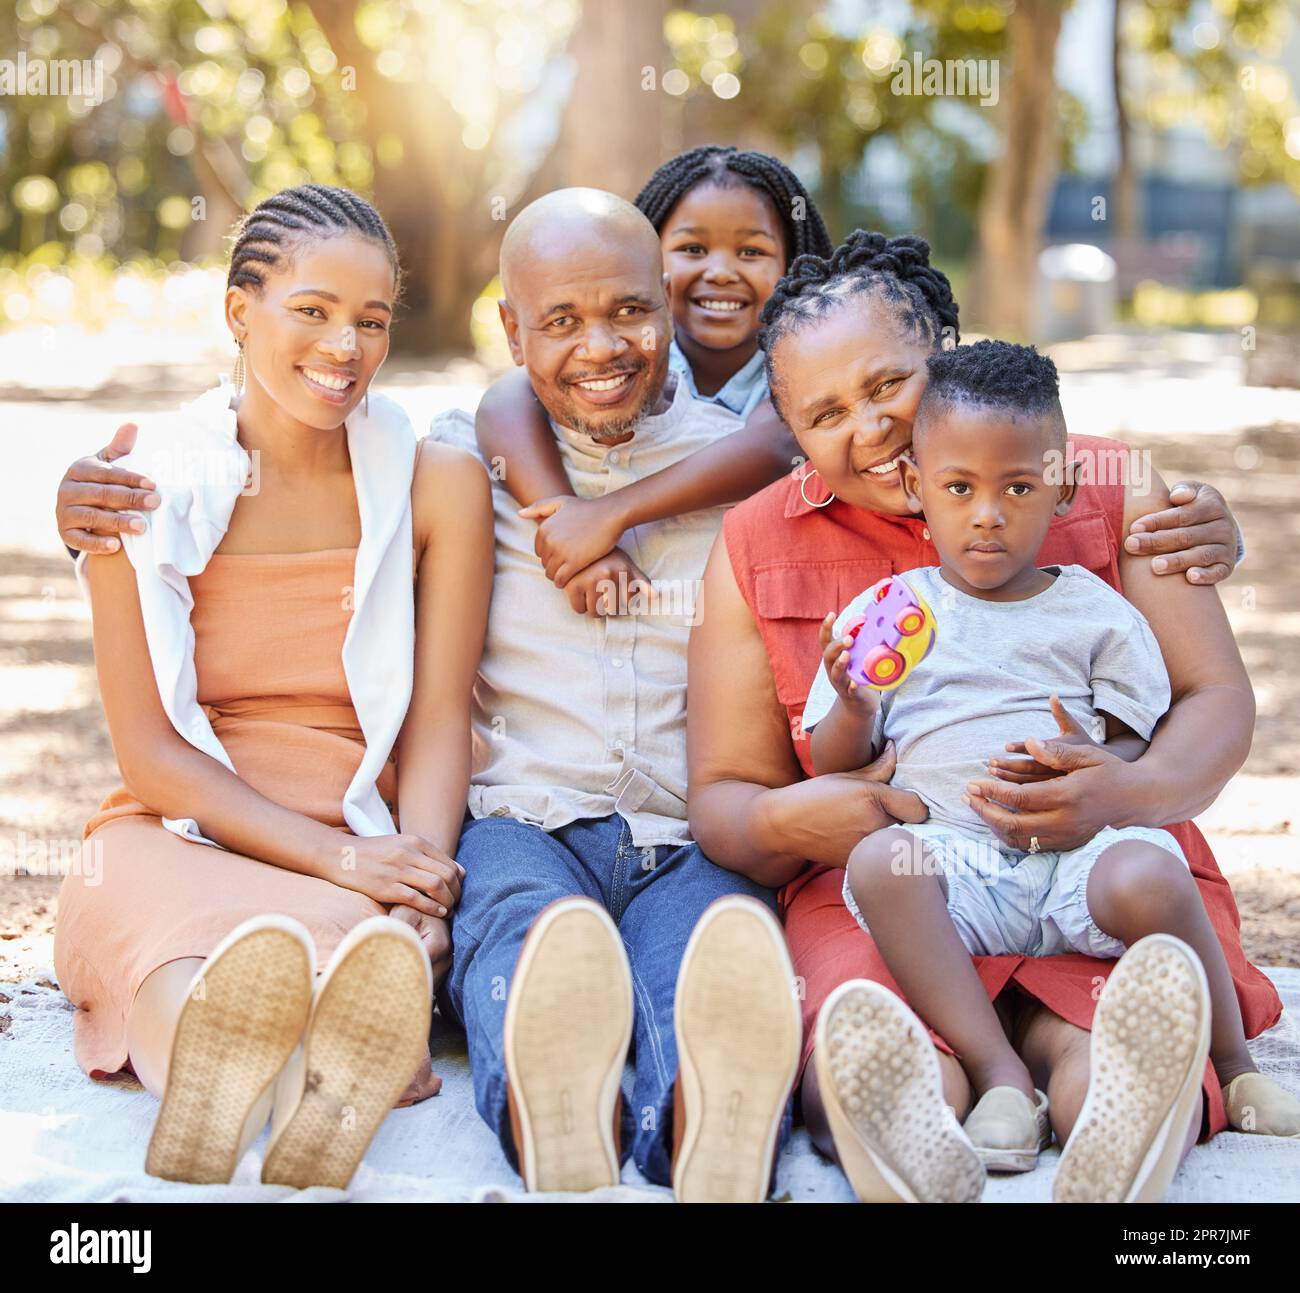 Portrait happy african american family of five spending quality time together in the park during summer. Grandparents, mother and children bonding together outside. An outing with the children Stock Photo